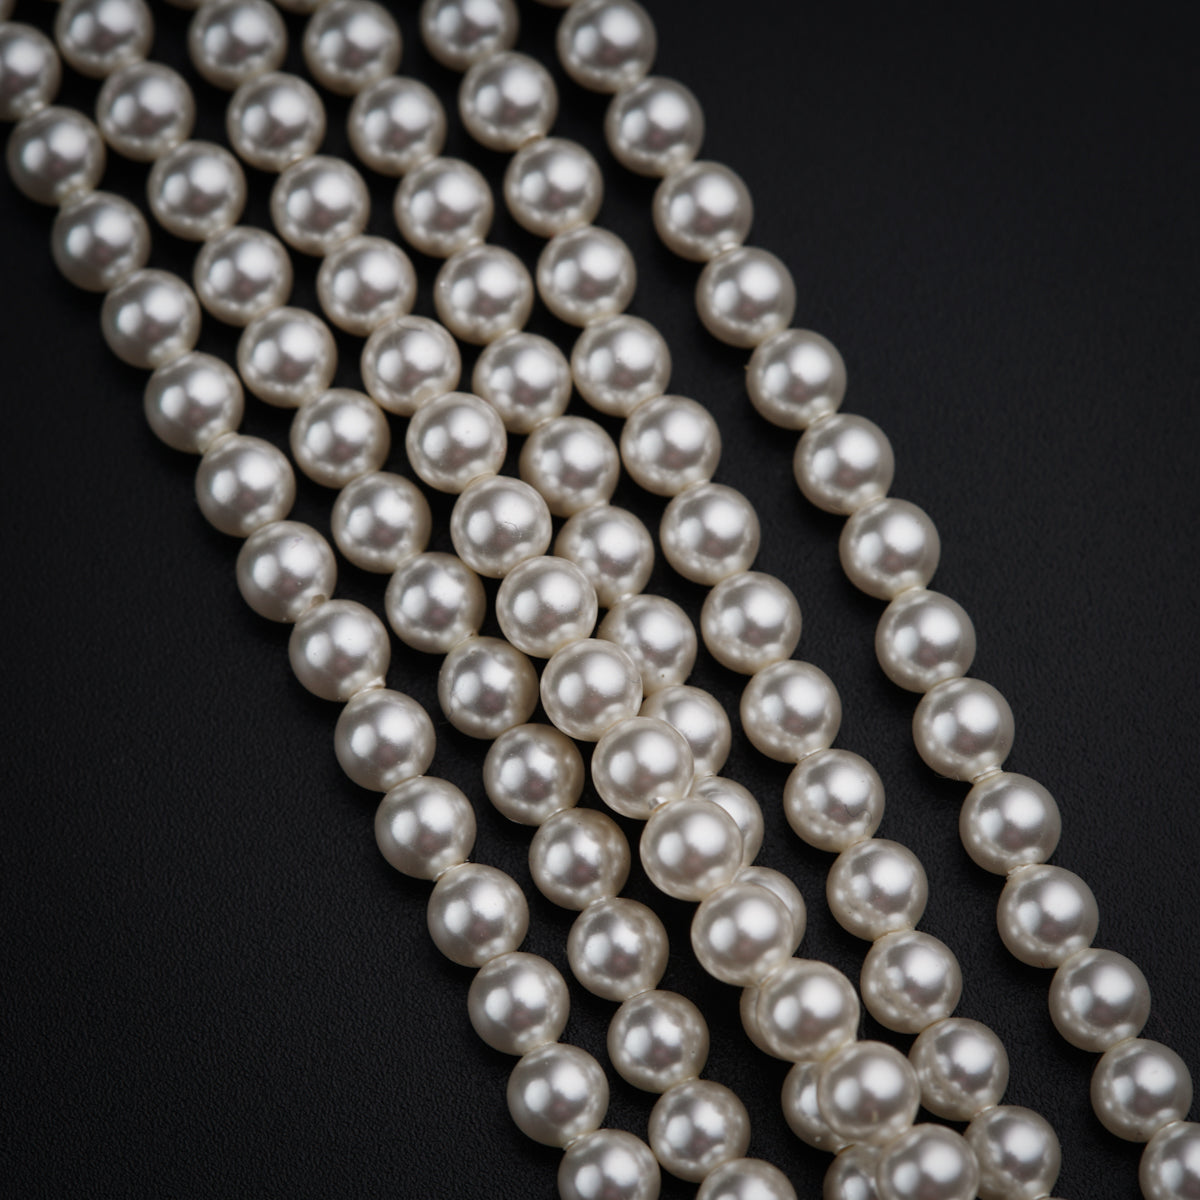 three strands of white pearls on a black background